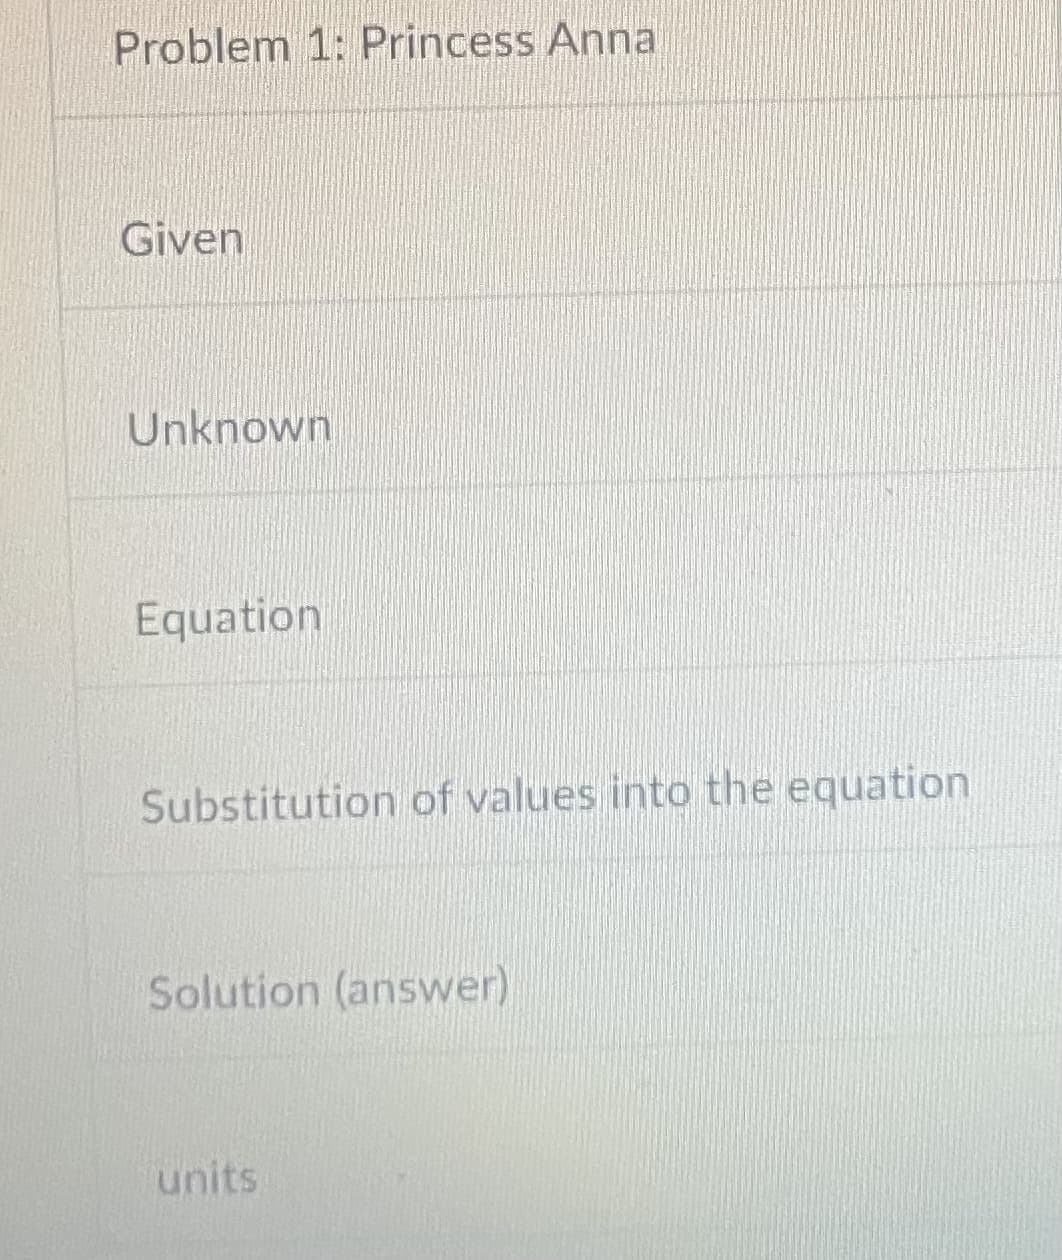 Problem 1: Princess Anna
Given
Unknown
Equation
Substitution of values into the equation
Solution (answer)
units
